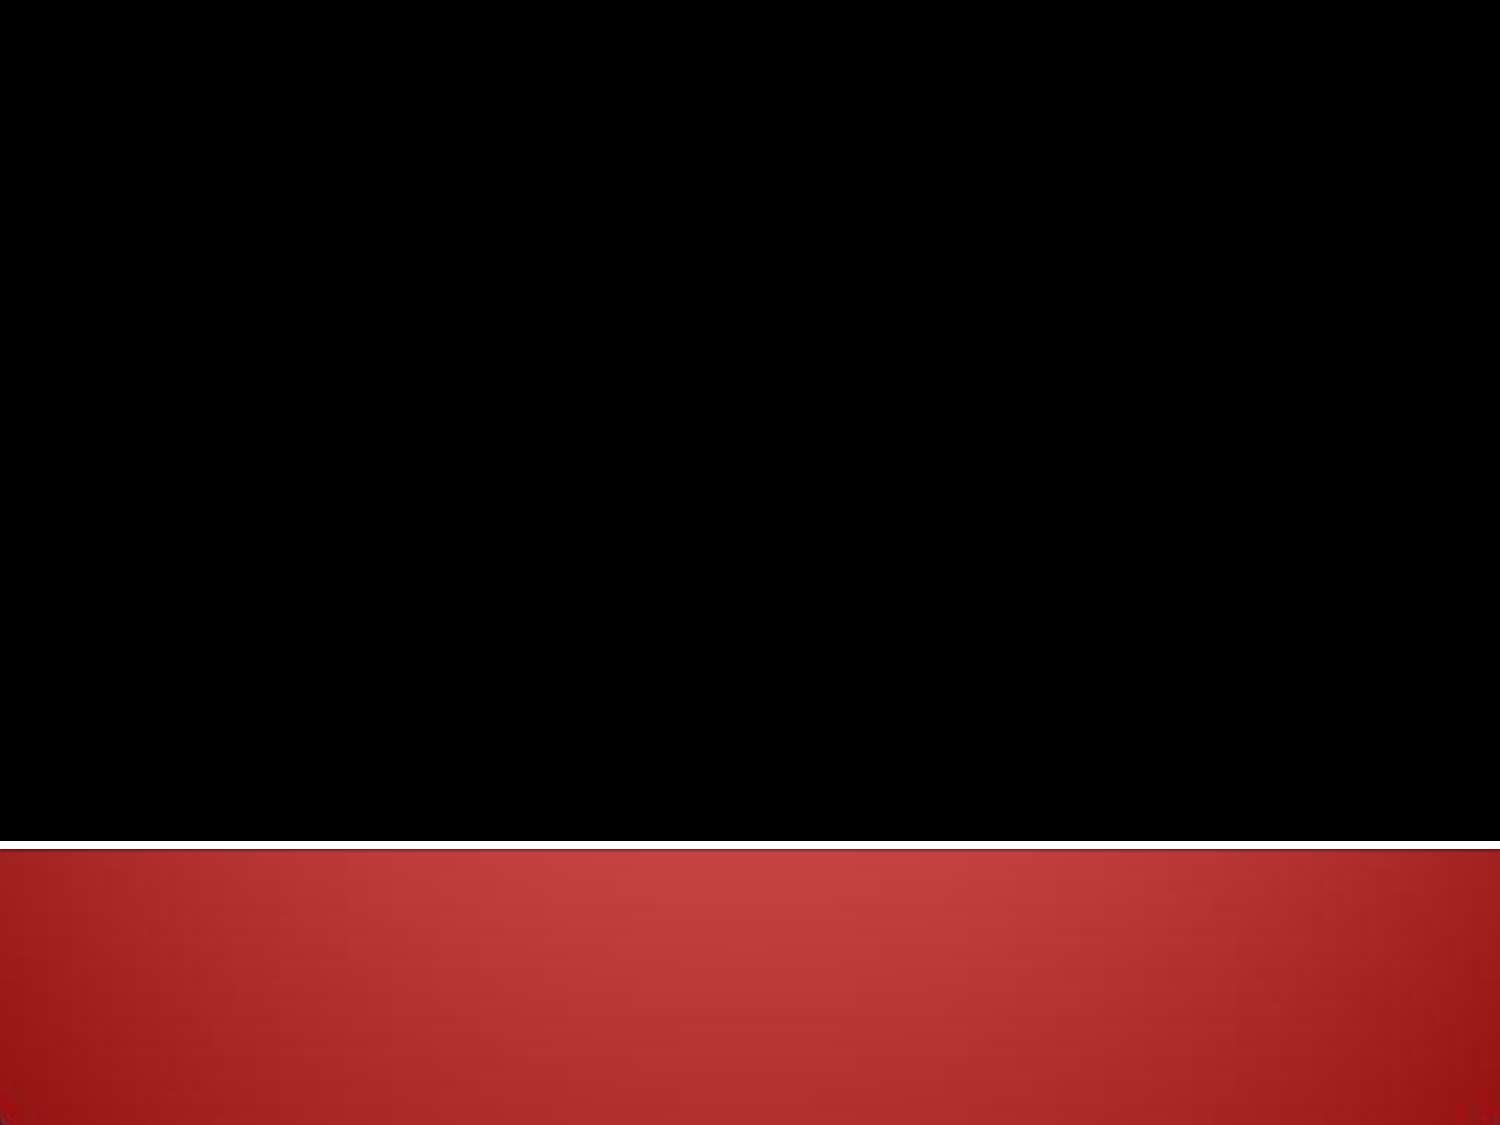 Red Black and White Free PPT Backgrounds for your PowerPoint Templates